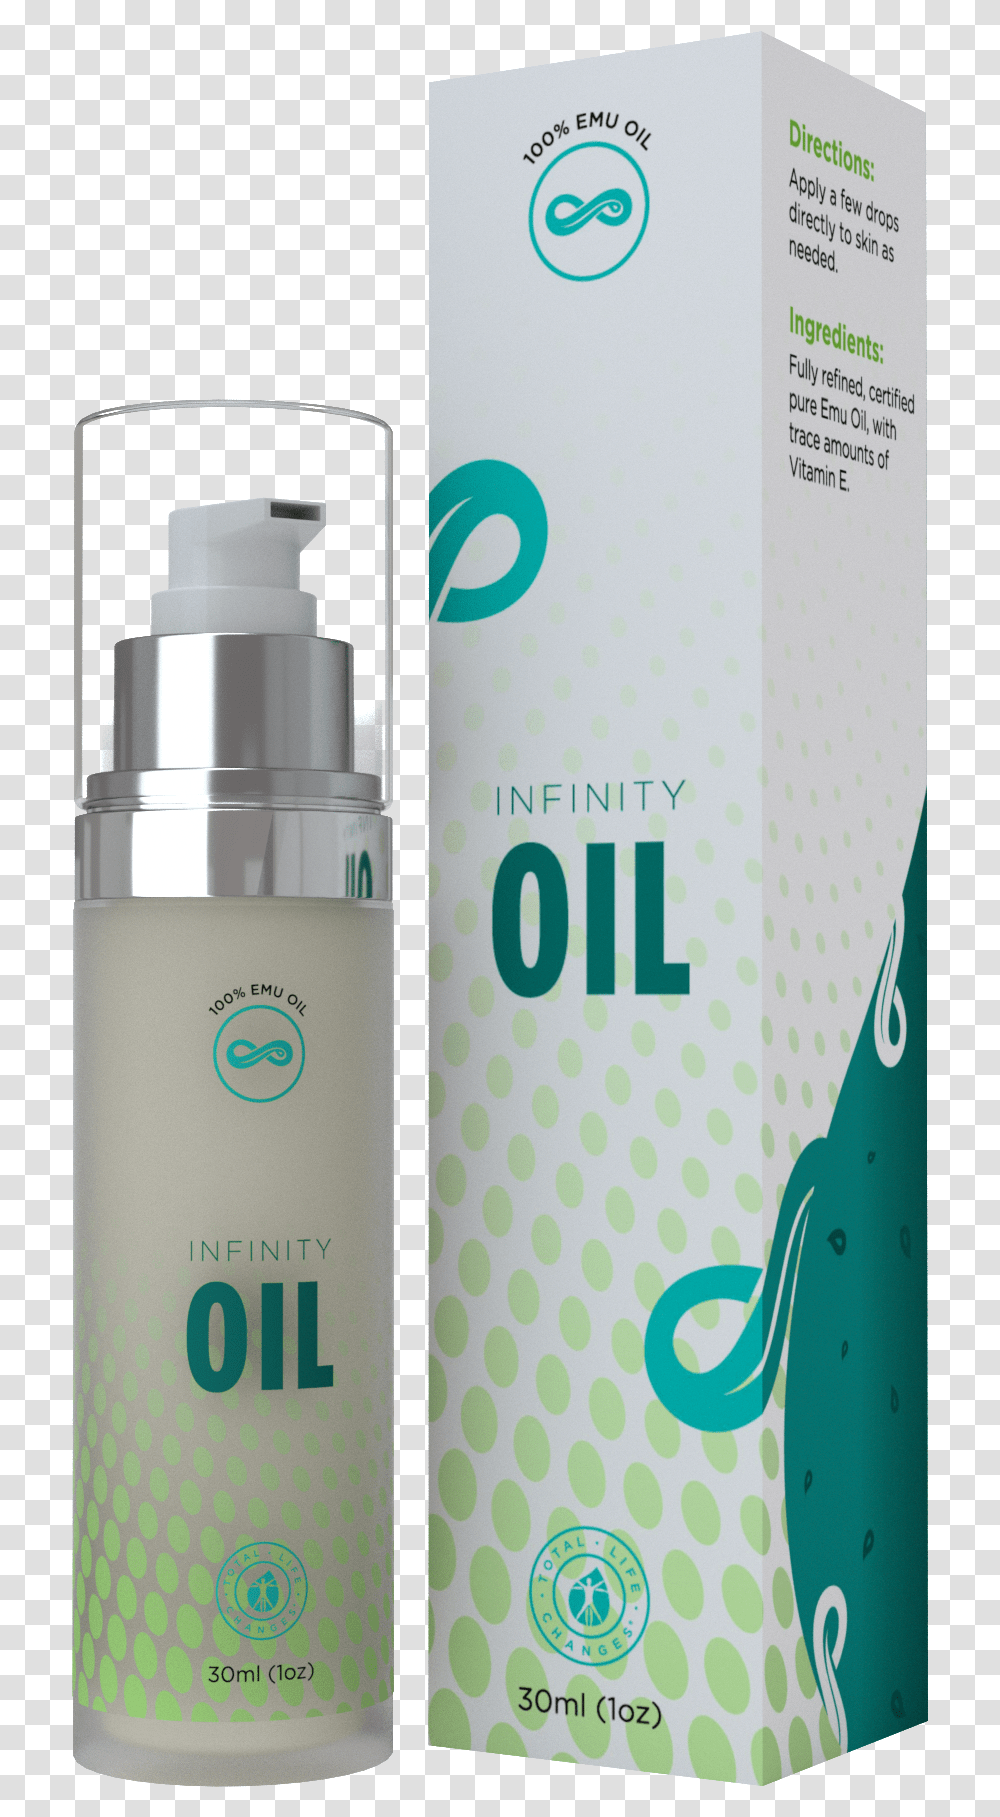 Nutraburst Tlc Productrender Infinityoil Infinity Oil Tlc, Cosmetics, Bottle, Perfume, Aftershave Transparent Png